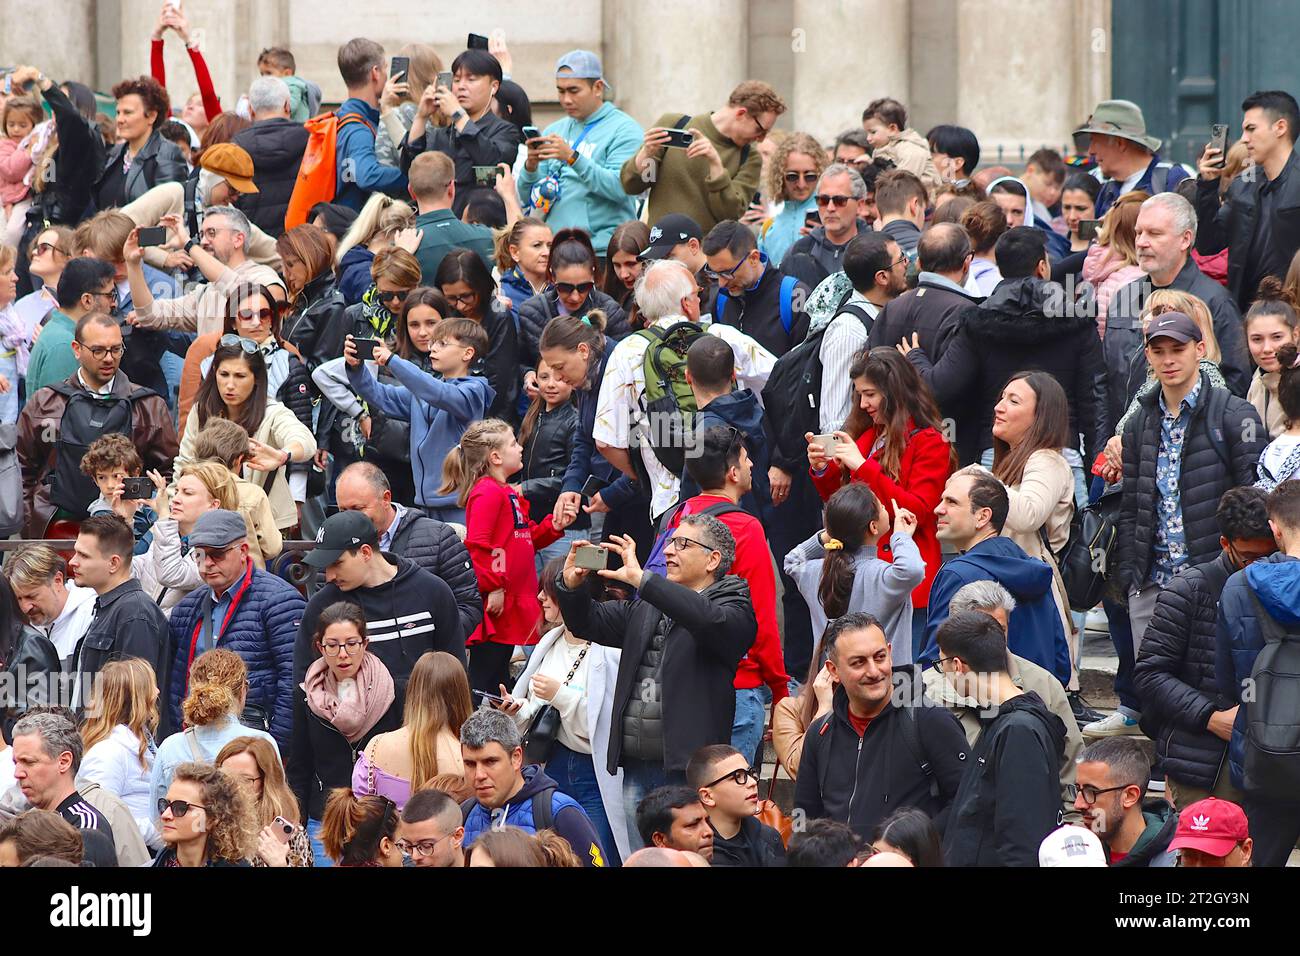 Large crowds of tourists and Italians mingle beside the Trevi fountain, despite overcast weather combined with a four day Italian Bank Holiday. Stock Photo